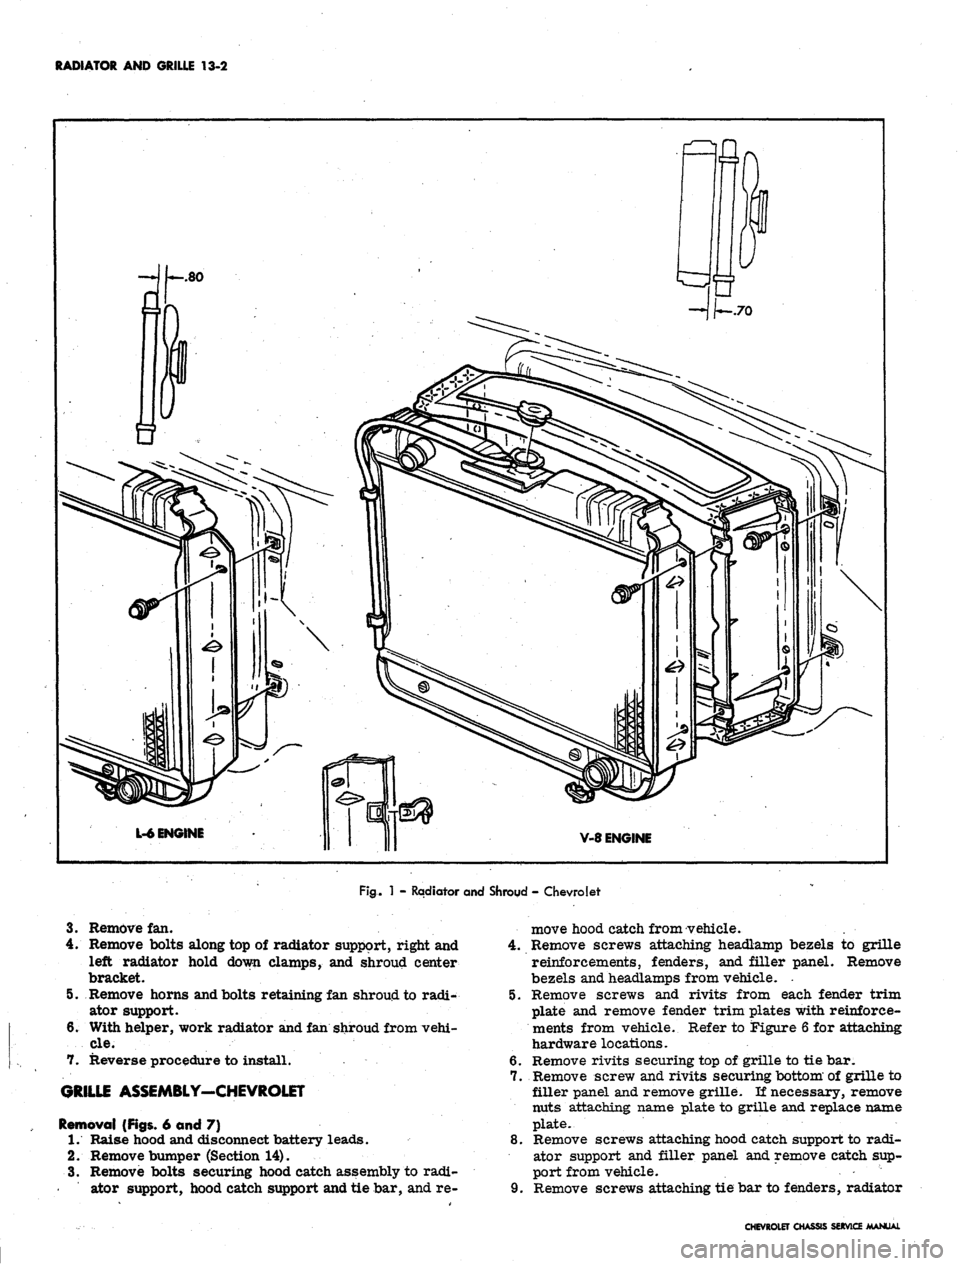 CHEVROLET CAMARO 1967 1.G Chassis User Guide 
RADIATOR AND GRILLE 13-2

Fig.
 1 - Radiator and Shroud - Chevrolet

3.
 Remove fan.

4.
 Remove bolts along top of radiator support, right and 4.

left radiator hold down clamps, and shroud center

